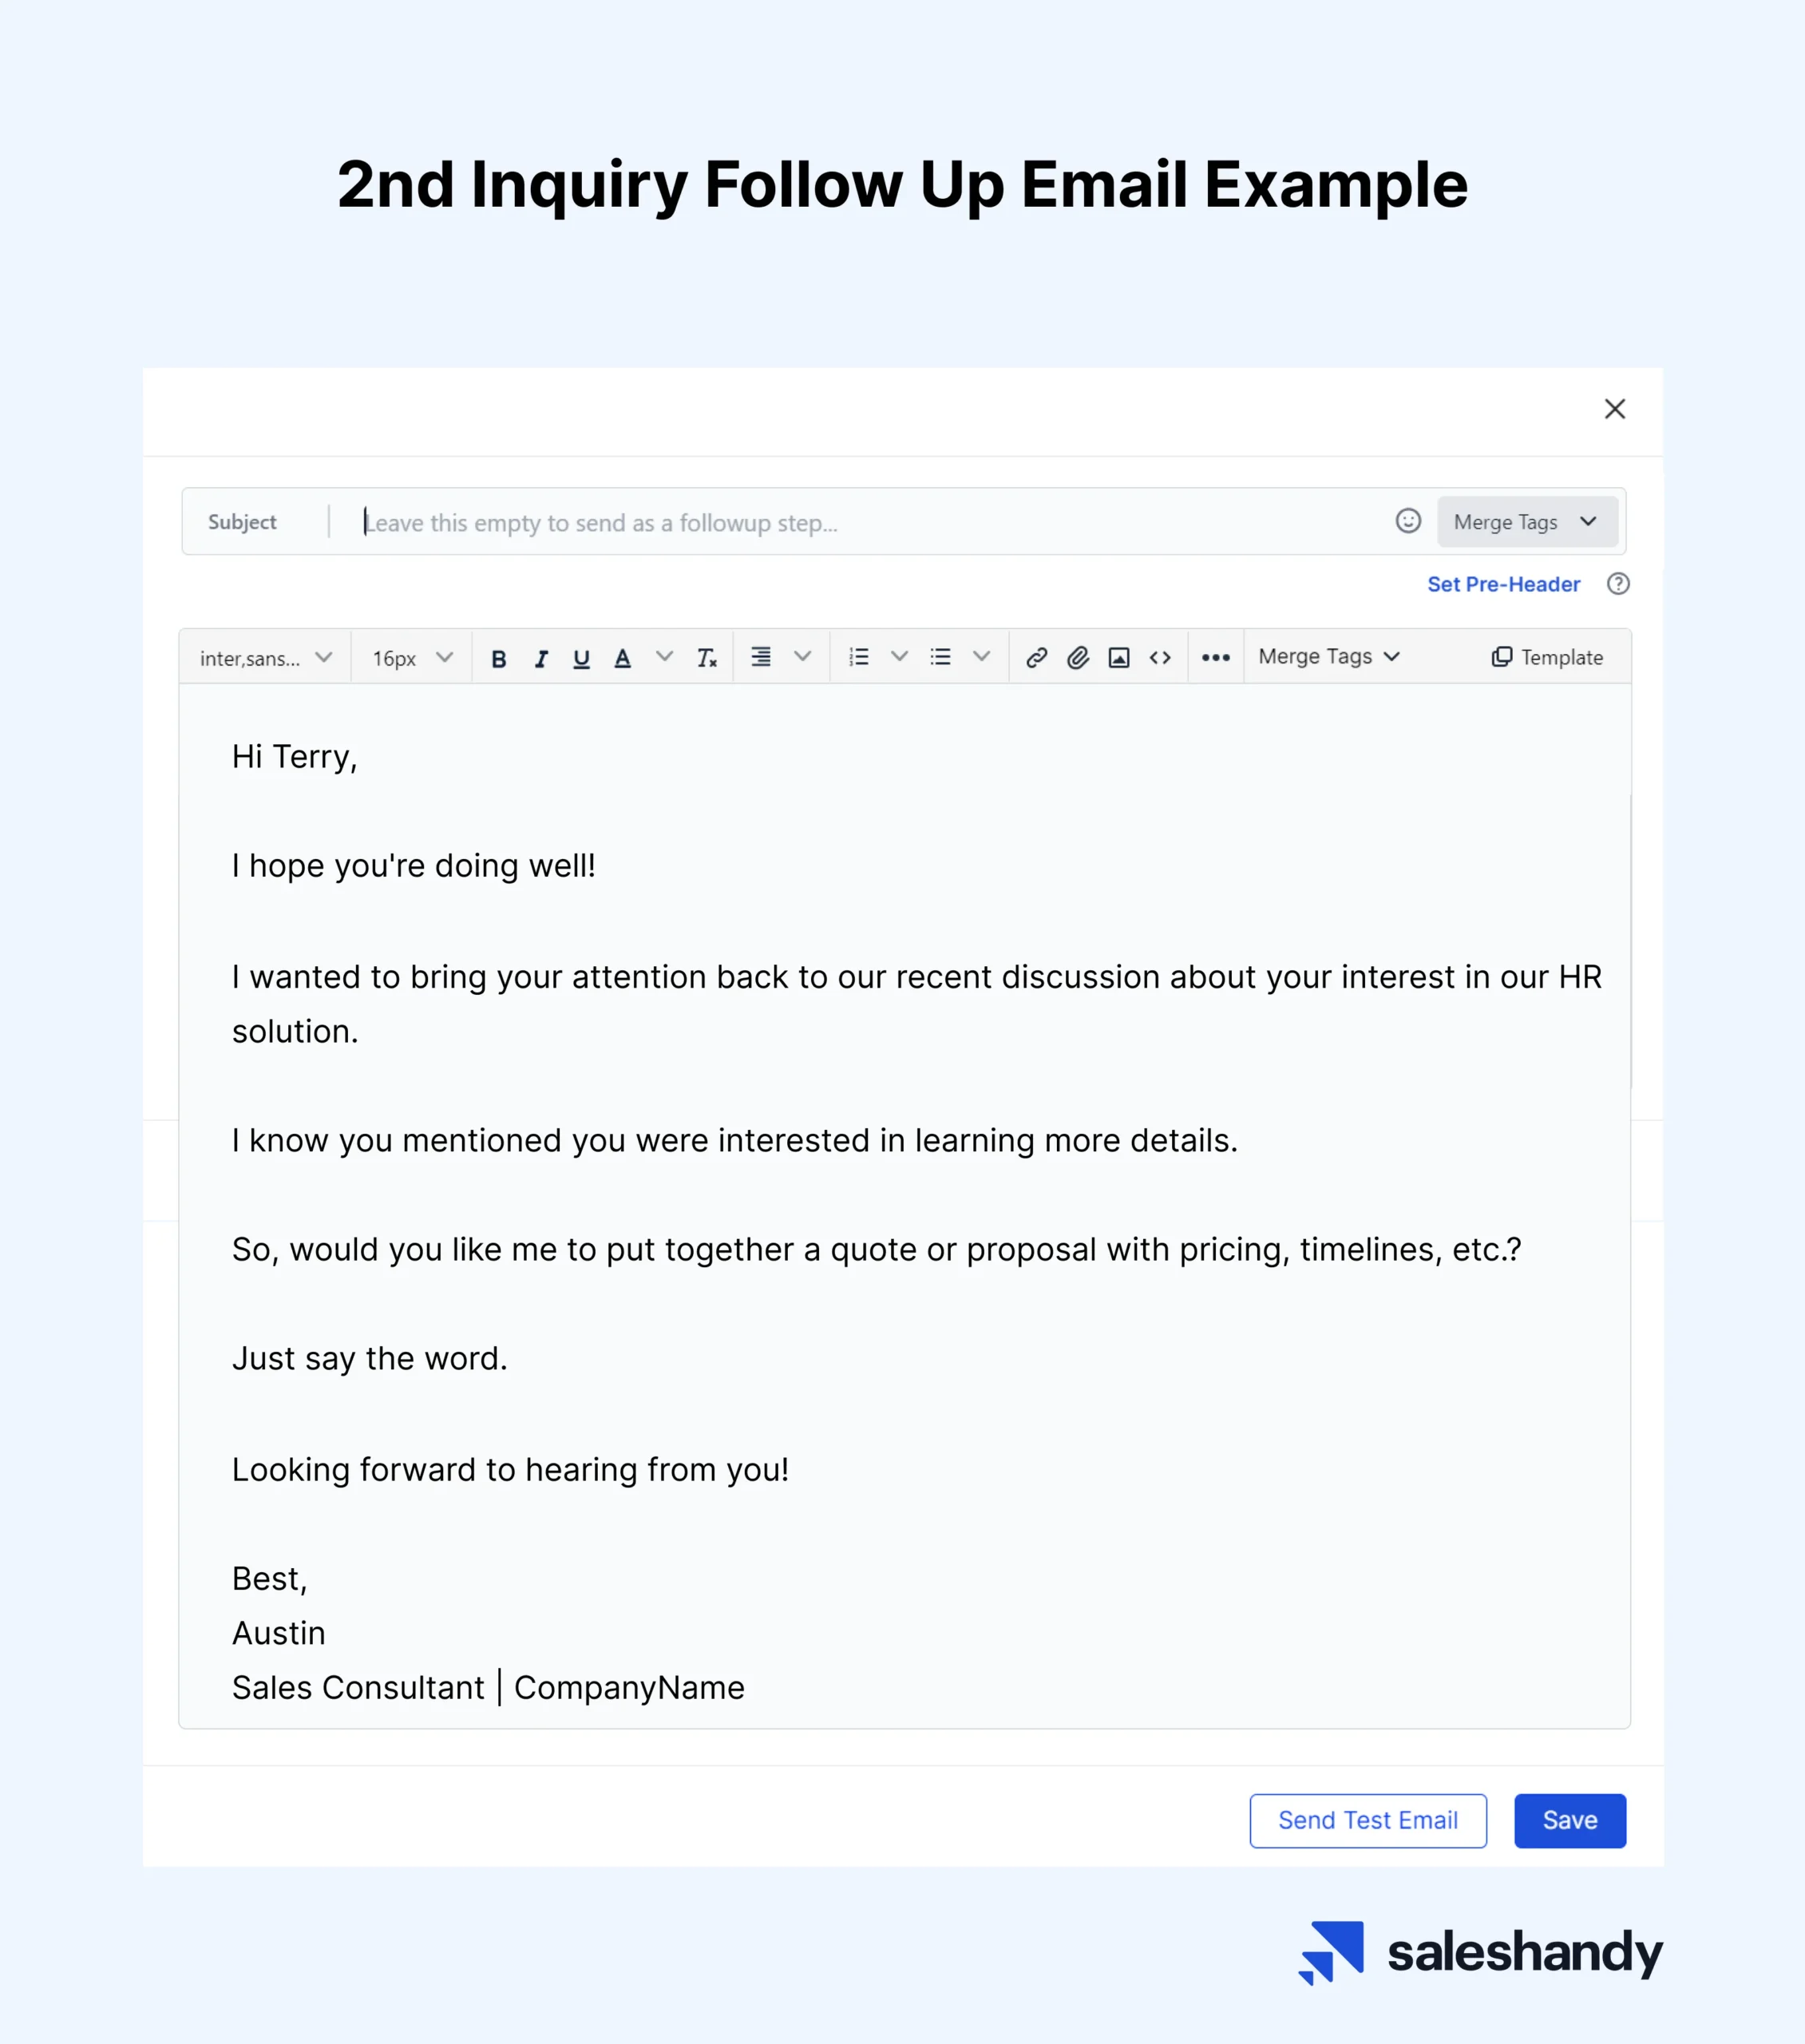 2nd Inquiry Follow Up Email Example